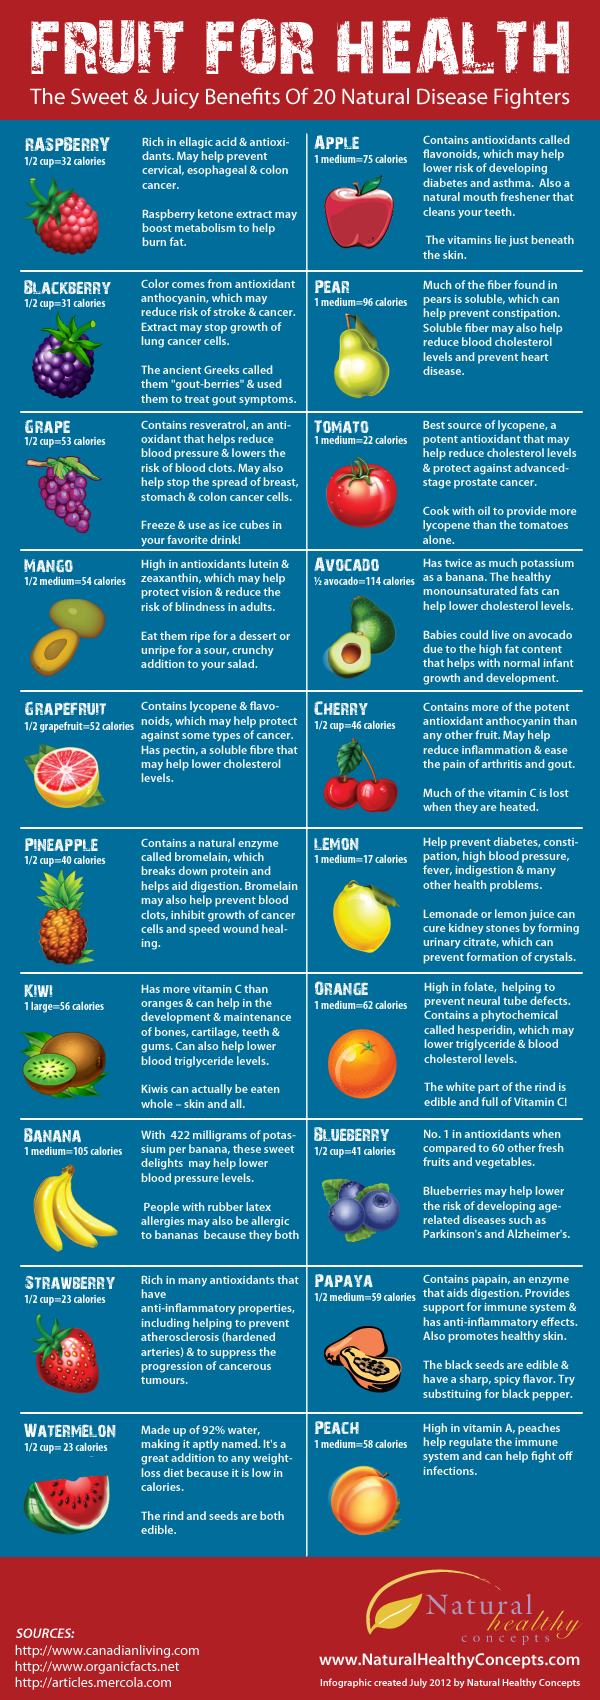 Calorie Count and Your Favorite Fruit